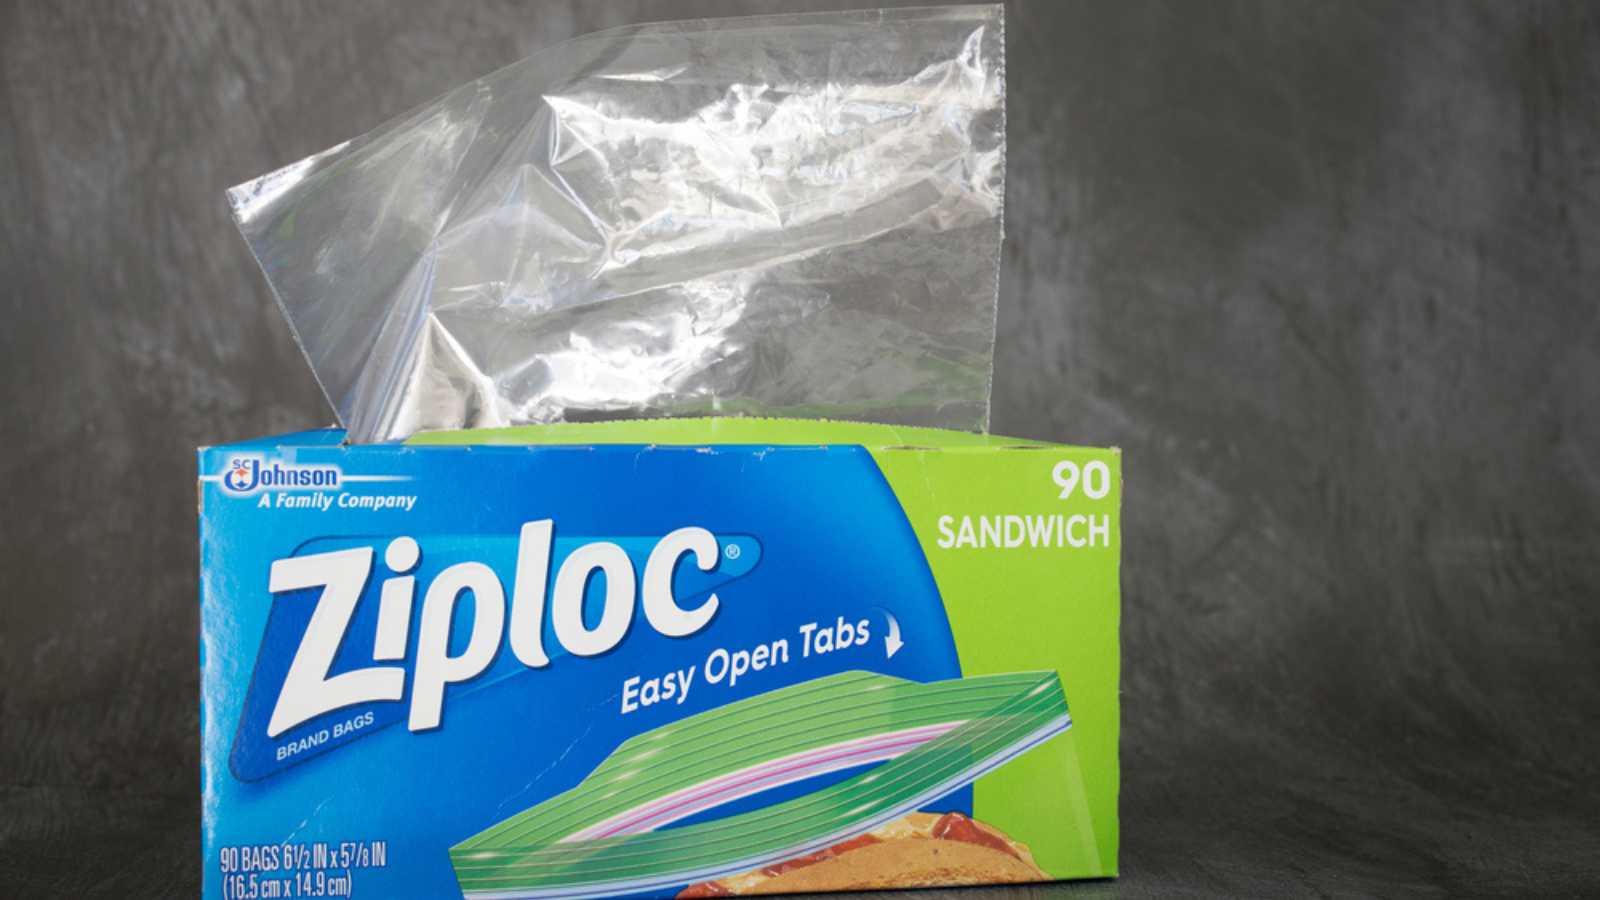 <p>Ziploc bags are for more than just food storage. The company also makes extra-large-sized bags designed for closet storage but can easily separate clean from dirty clothing in a suitcase. Once sealed, the bag is waterproof and keeps any scents inside. Plus, they’re durable enough to be used again. Travelers who’ve used these bags can’t praise them enough.</p>